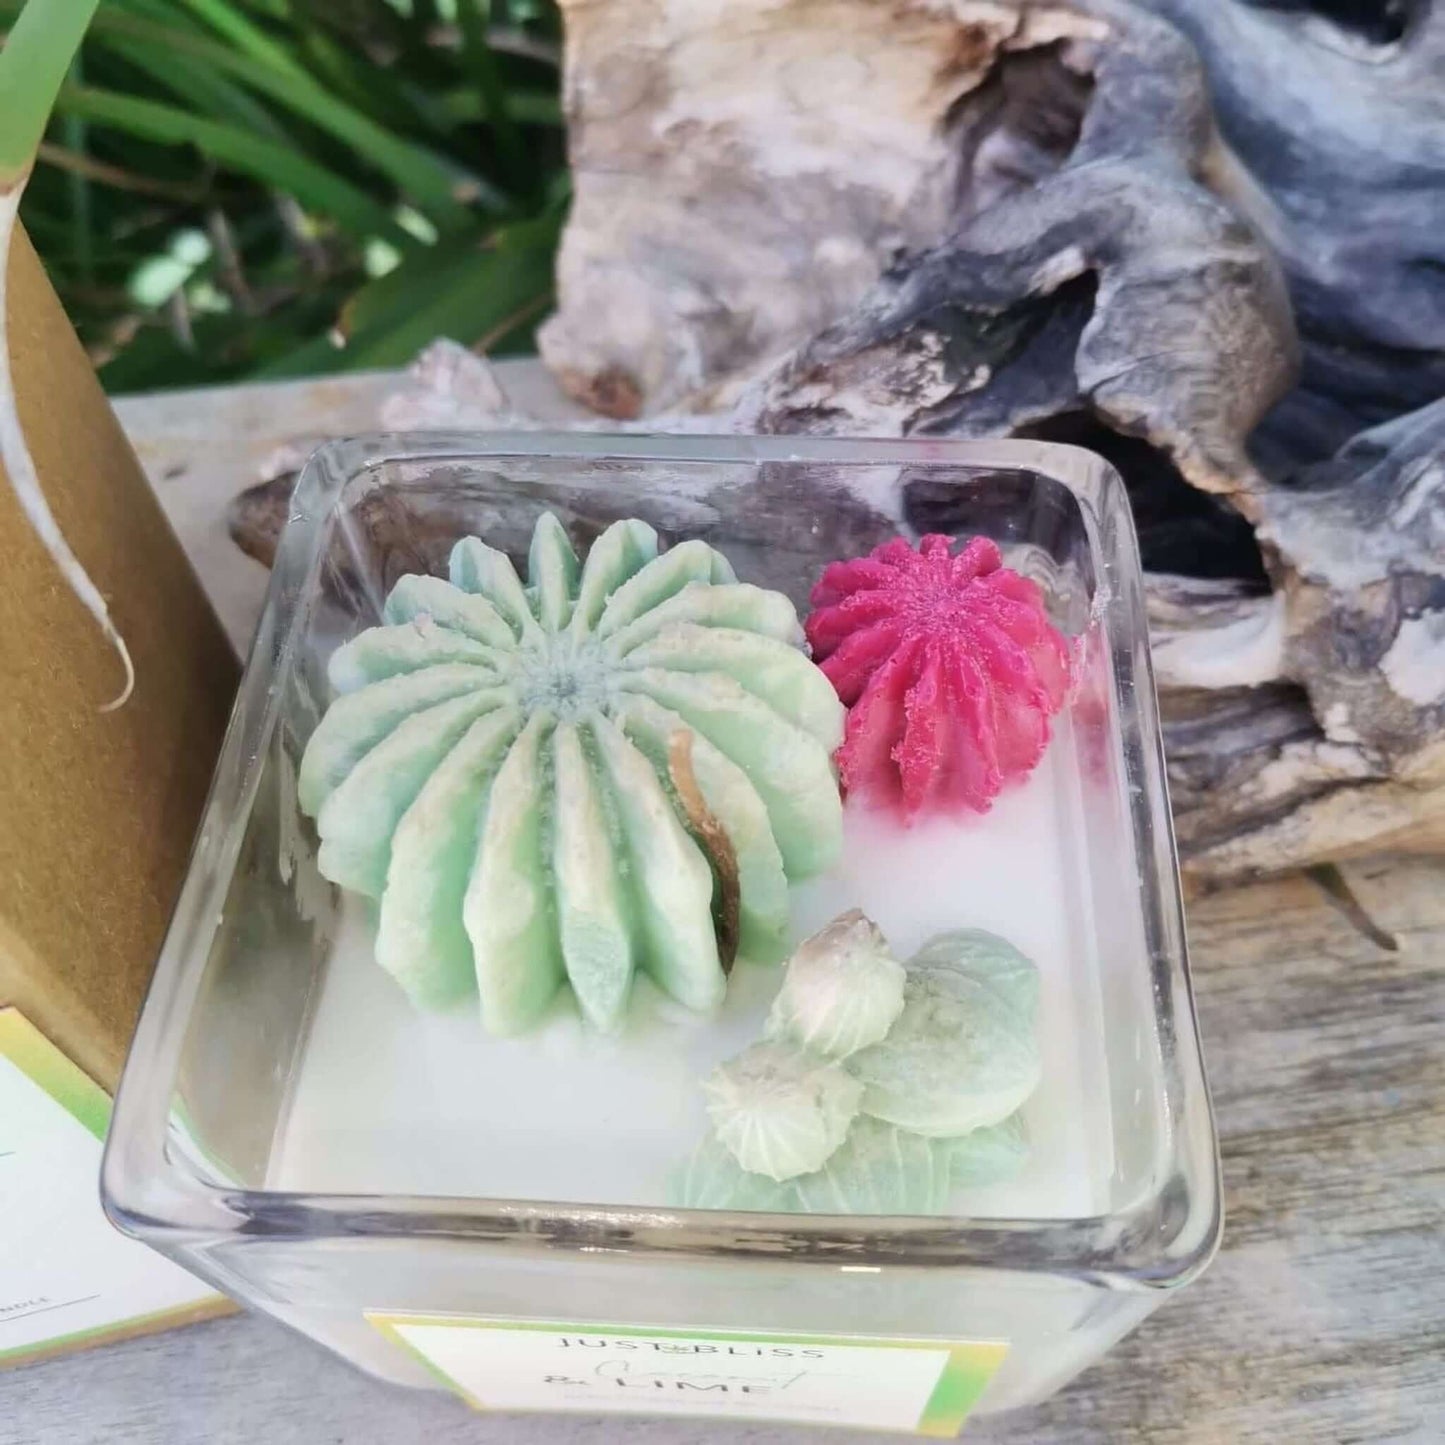 JUSTBLISS: cactus flower candle: coconut and lime (200g)